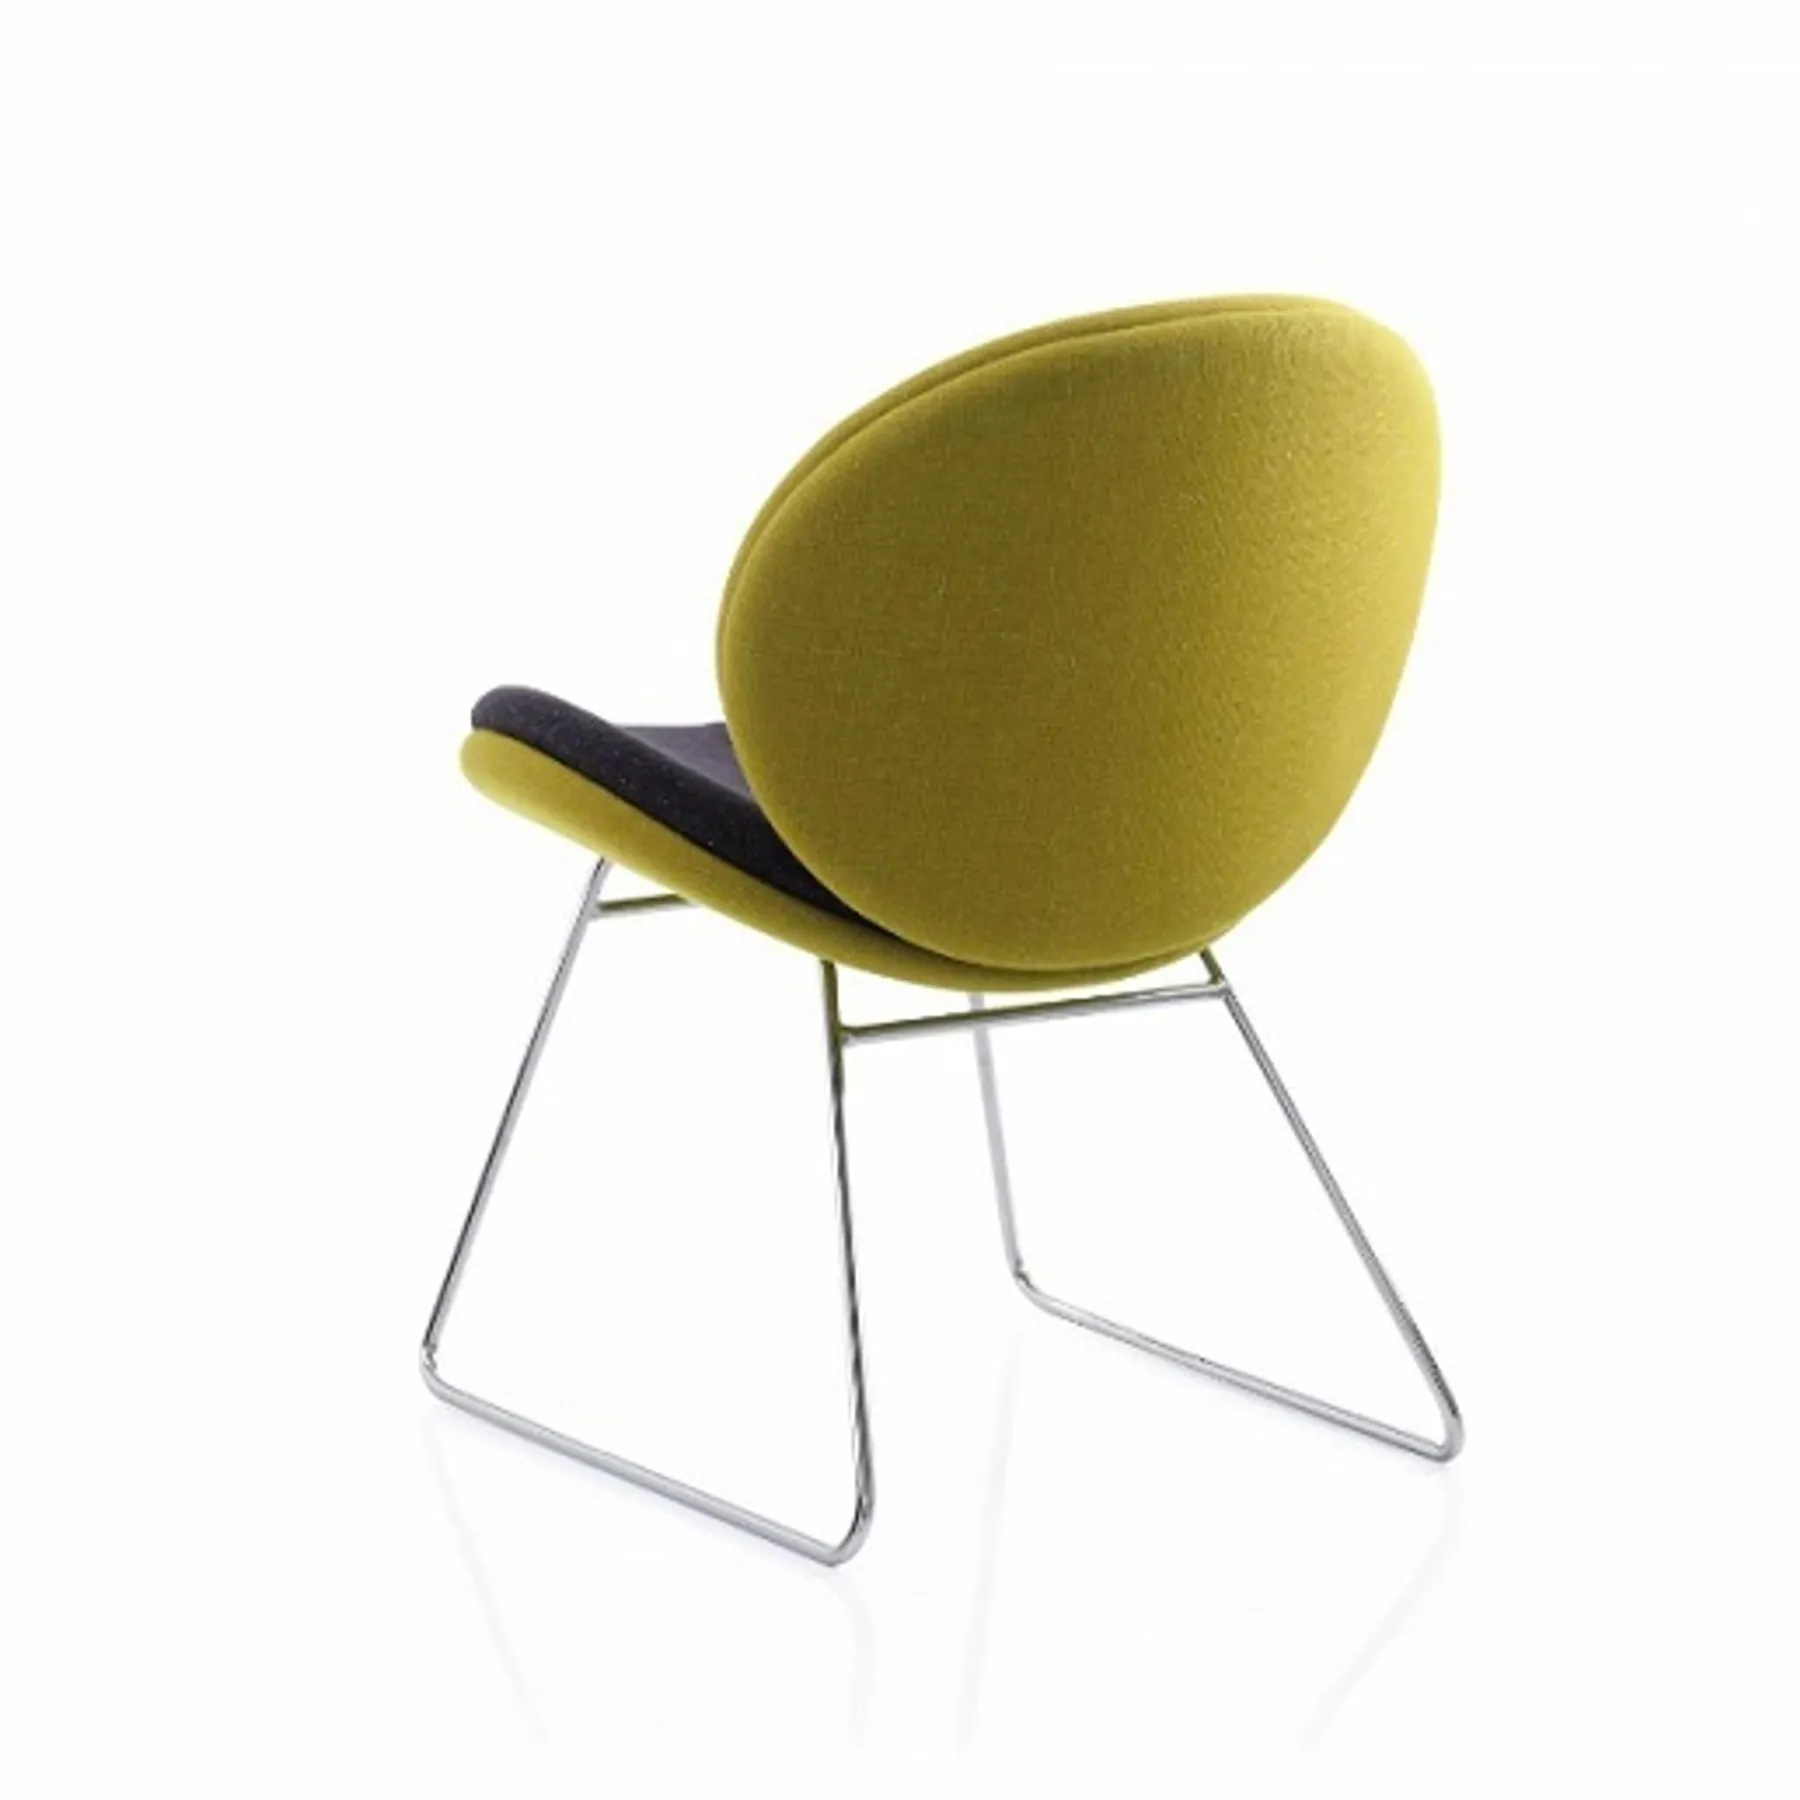 Lof Direct Giggle Chair ocee design giggle2 rear view